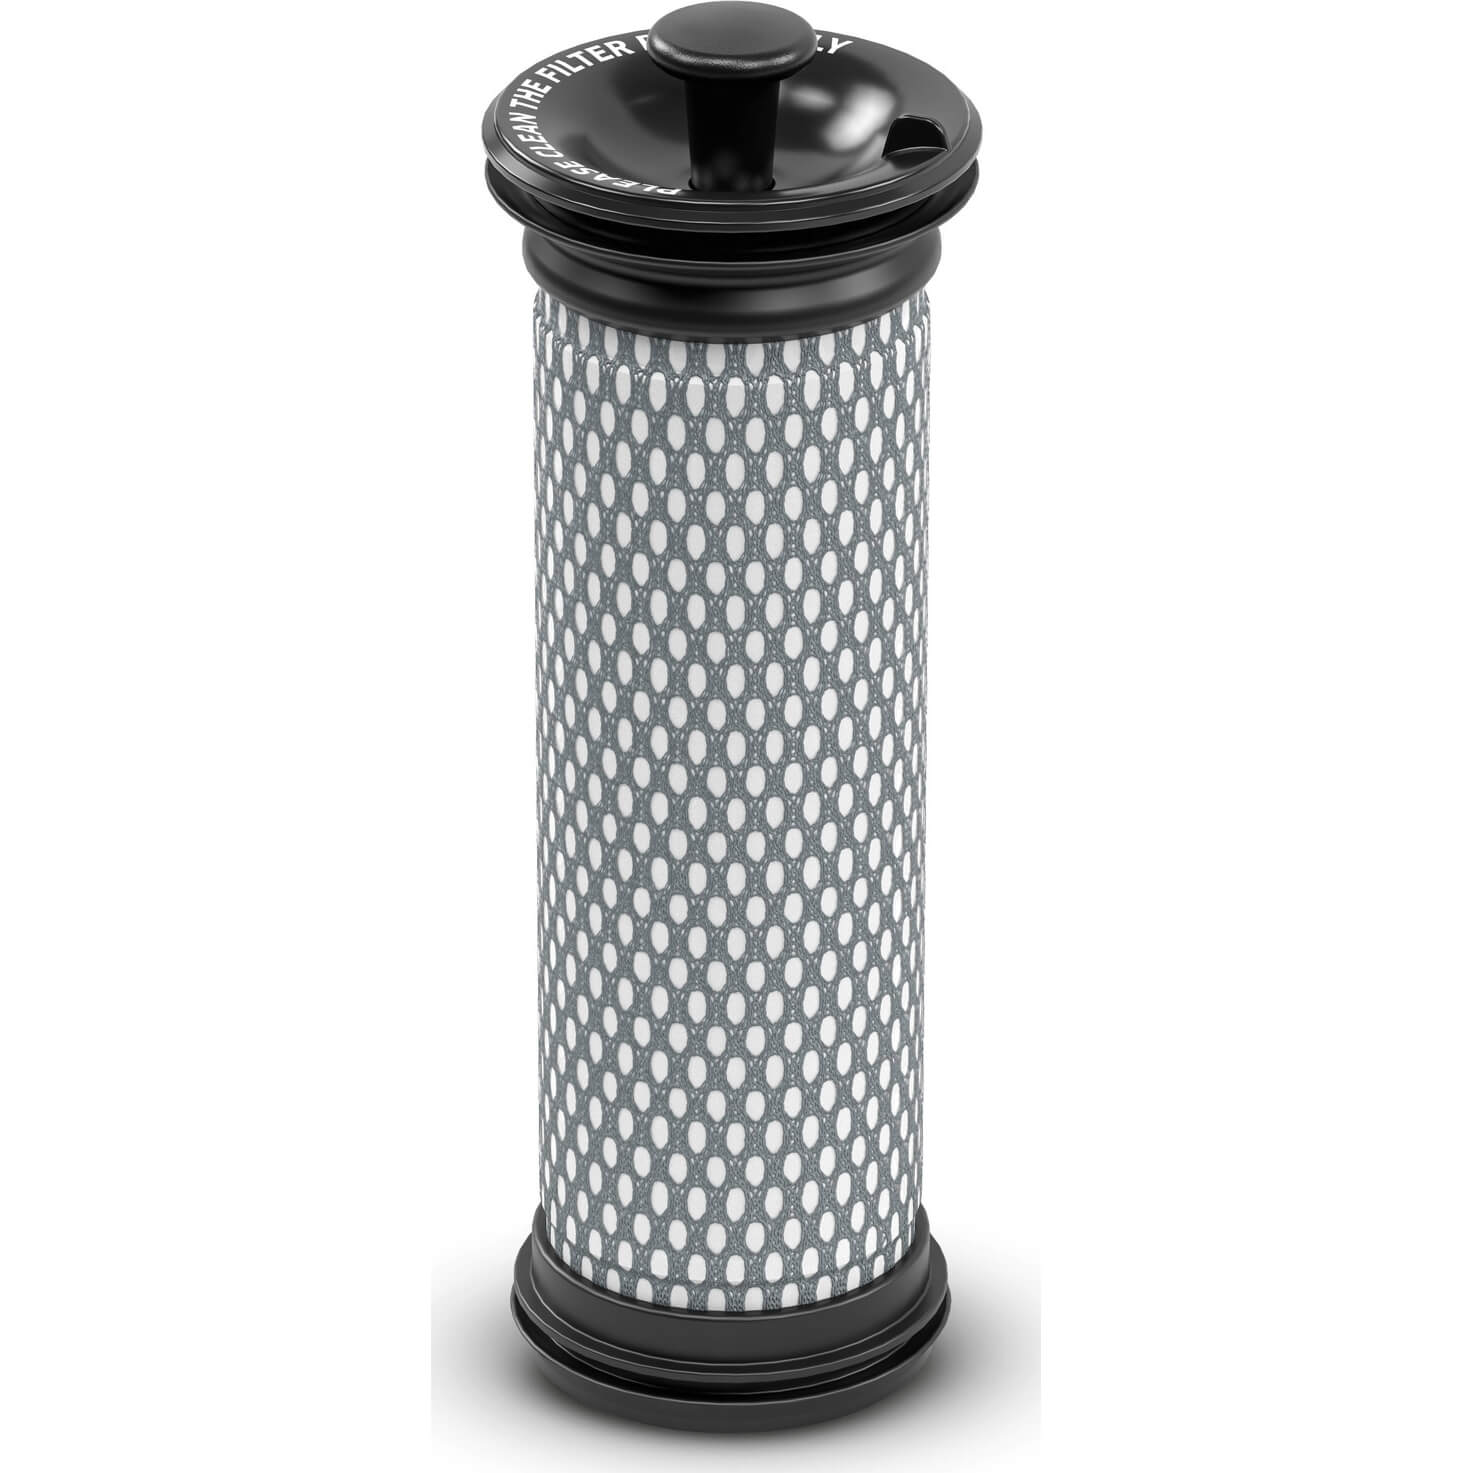 Karcher Air Inlet Filter for VC 4, 6 and 7 Cordless Vacuum Cleaners